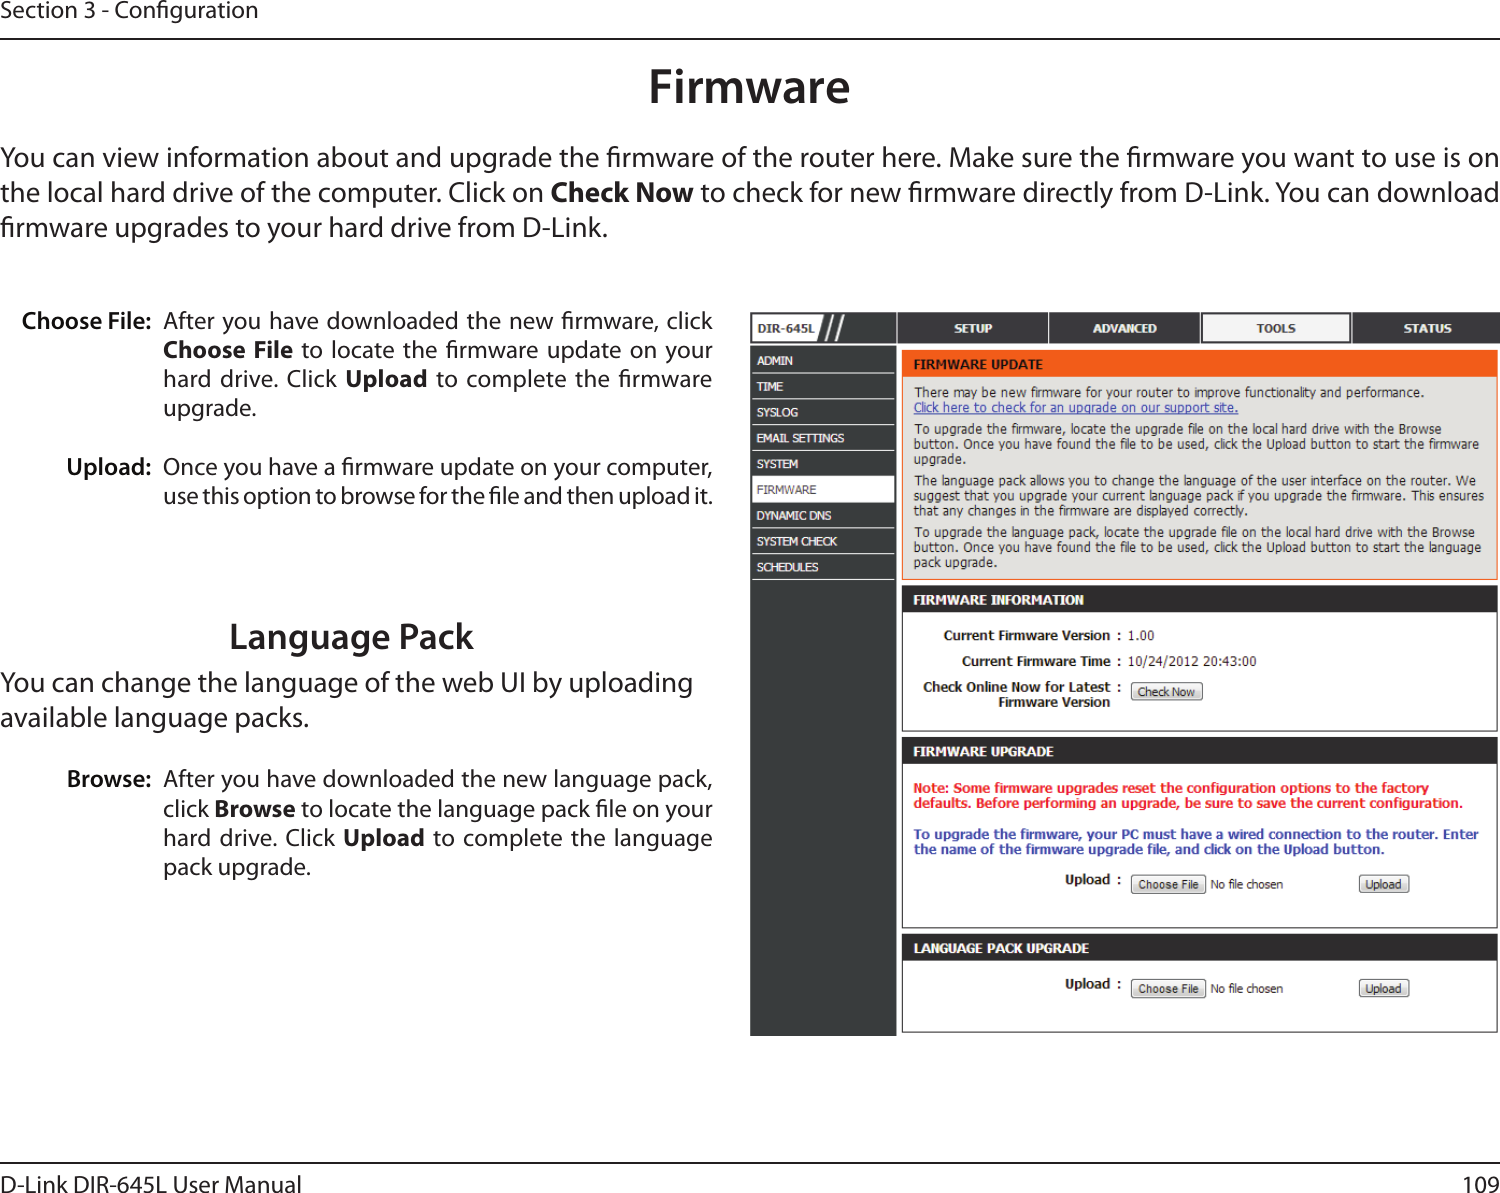 109D-Link DIR-645L User ManualSection 3 - CongurationFirmwareChoose File:Upload:After you have downloaded the new rmware, click Choose File to locate the  rmware update  on your hard drive. Click Upload  to complete the  rmware upgrade.Once you have a rmware update on your computer, use this option to browse for the le and then upload it. You can view information about and upgrade the rmware of the router here. Make sure the rmware you want to use is on the local hard drive of the computer. Click on Check Now to check for new rmware directly from D-Link. You can download rmware upgrades to your hard drive from D-Link.After you have downloaded the new language pack, click Browse to locate the language pack le on your hard drive. Click  Upload to complete the language pack upgrade.Language PackYou can change the language of the web UI by uploading available language packs.Browse: